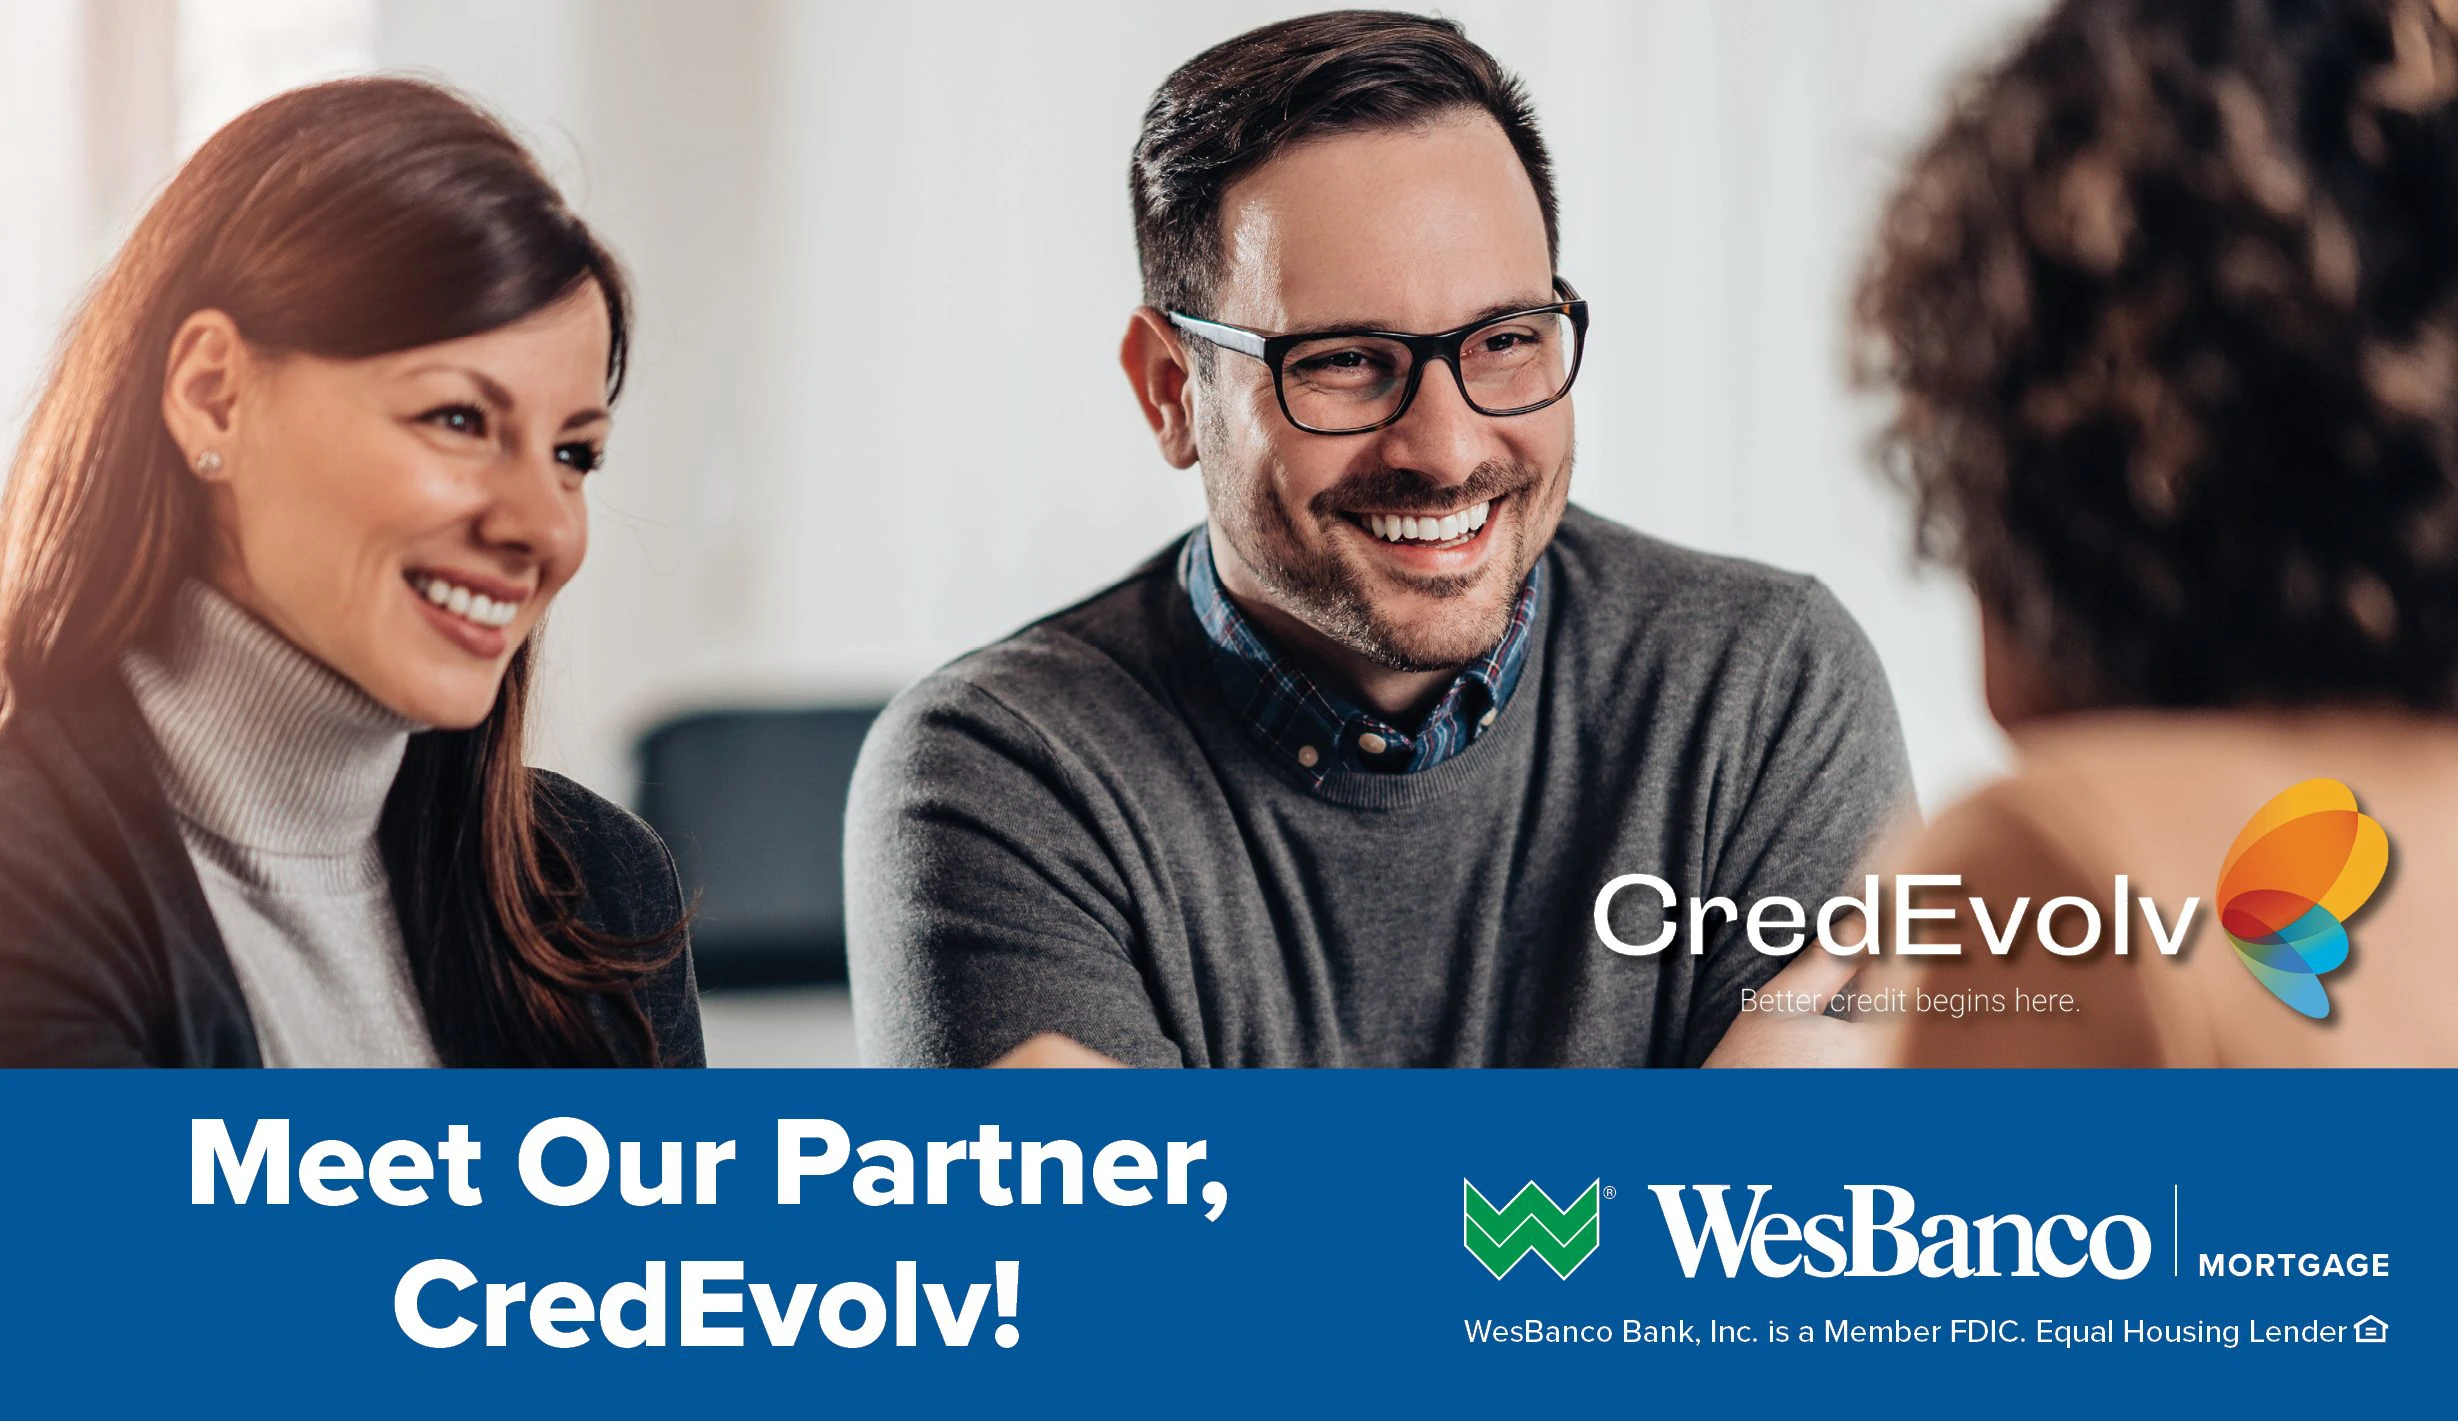 Meet our partner, CredEvolv! Picture of woman and man smiling.